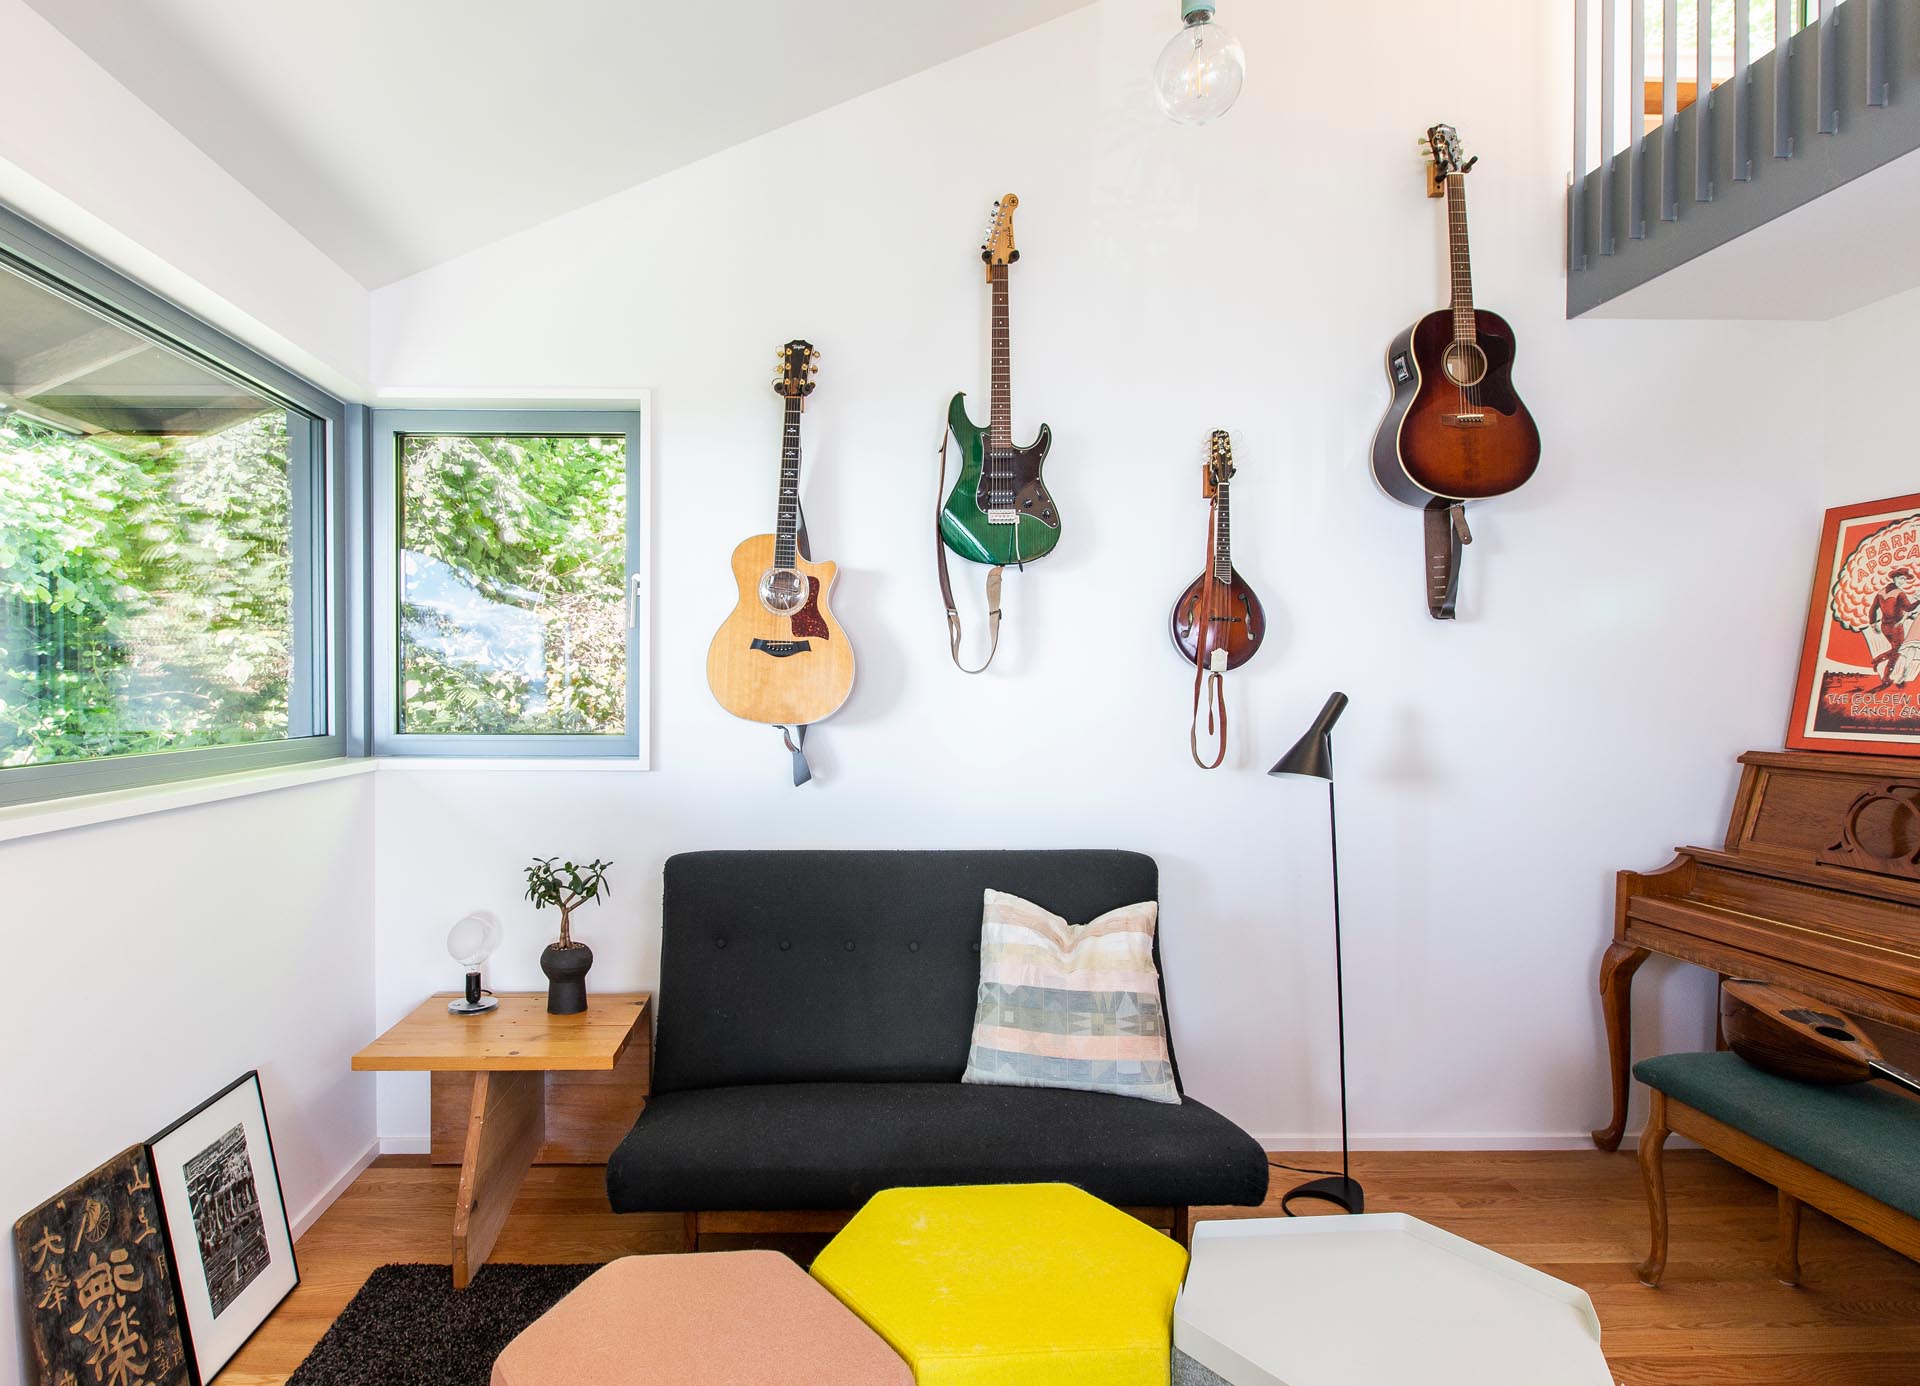 Tucked away in a small nook off a living room is a music corner, with hanging guitars, a piano, and a small sofa.